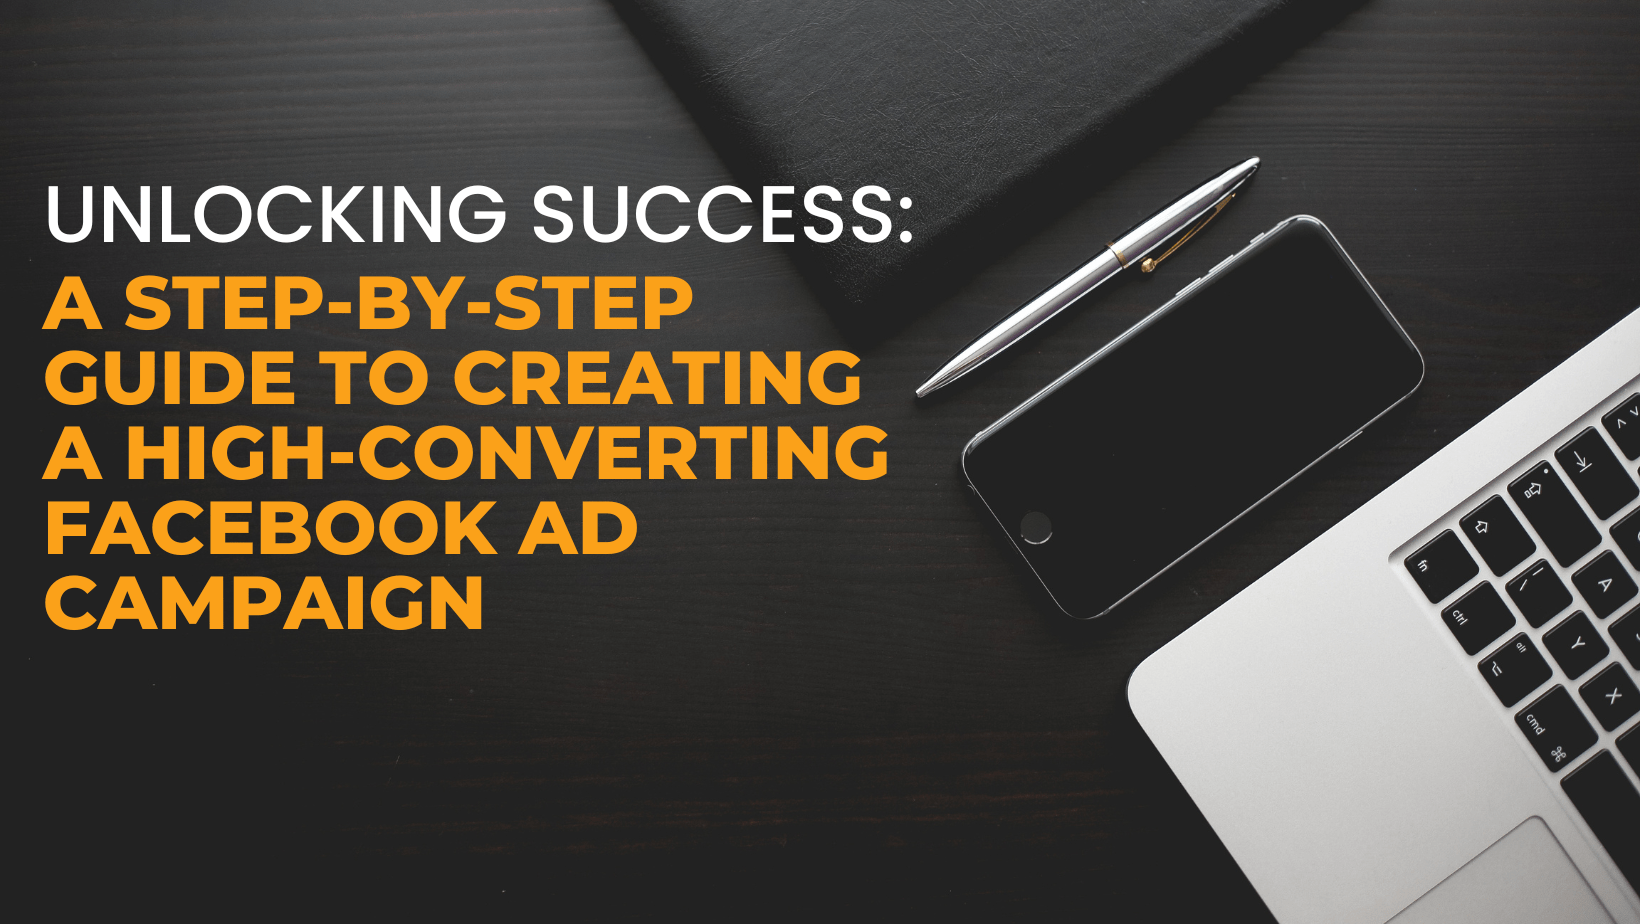 Unlocking Success: A Step-by-Step Guide to Creating a High-Converting Facebook Ad Campaign